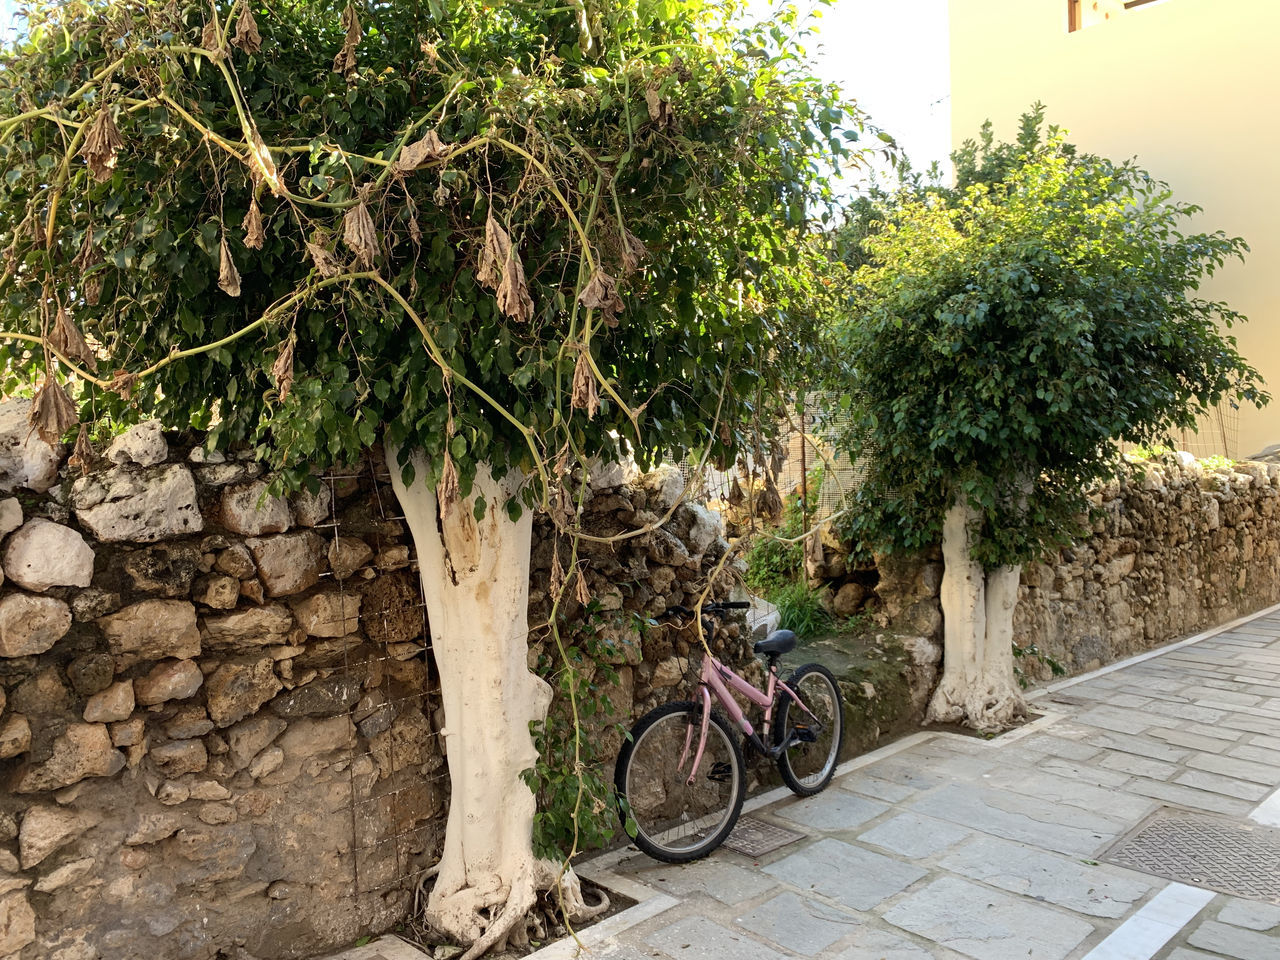 plant, bicycle, tree, architecture, nature, transportation, footpath, growth, bicycle wheel, day, mode of transportation, built structure, building exterior, city, street, land vehicle, no people, outdoors, wall, cobblestone, flower, vehicle, wheel, sidewalk, sunlight, green, wall - building feature, courtyard, building, travel, paving stone